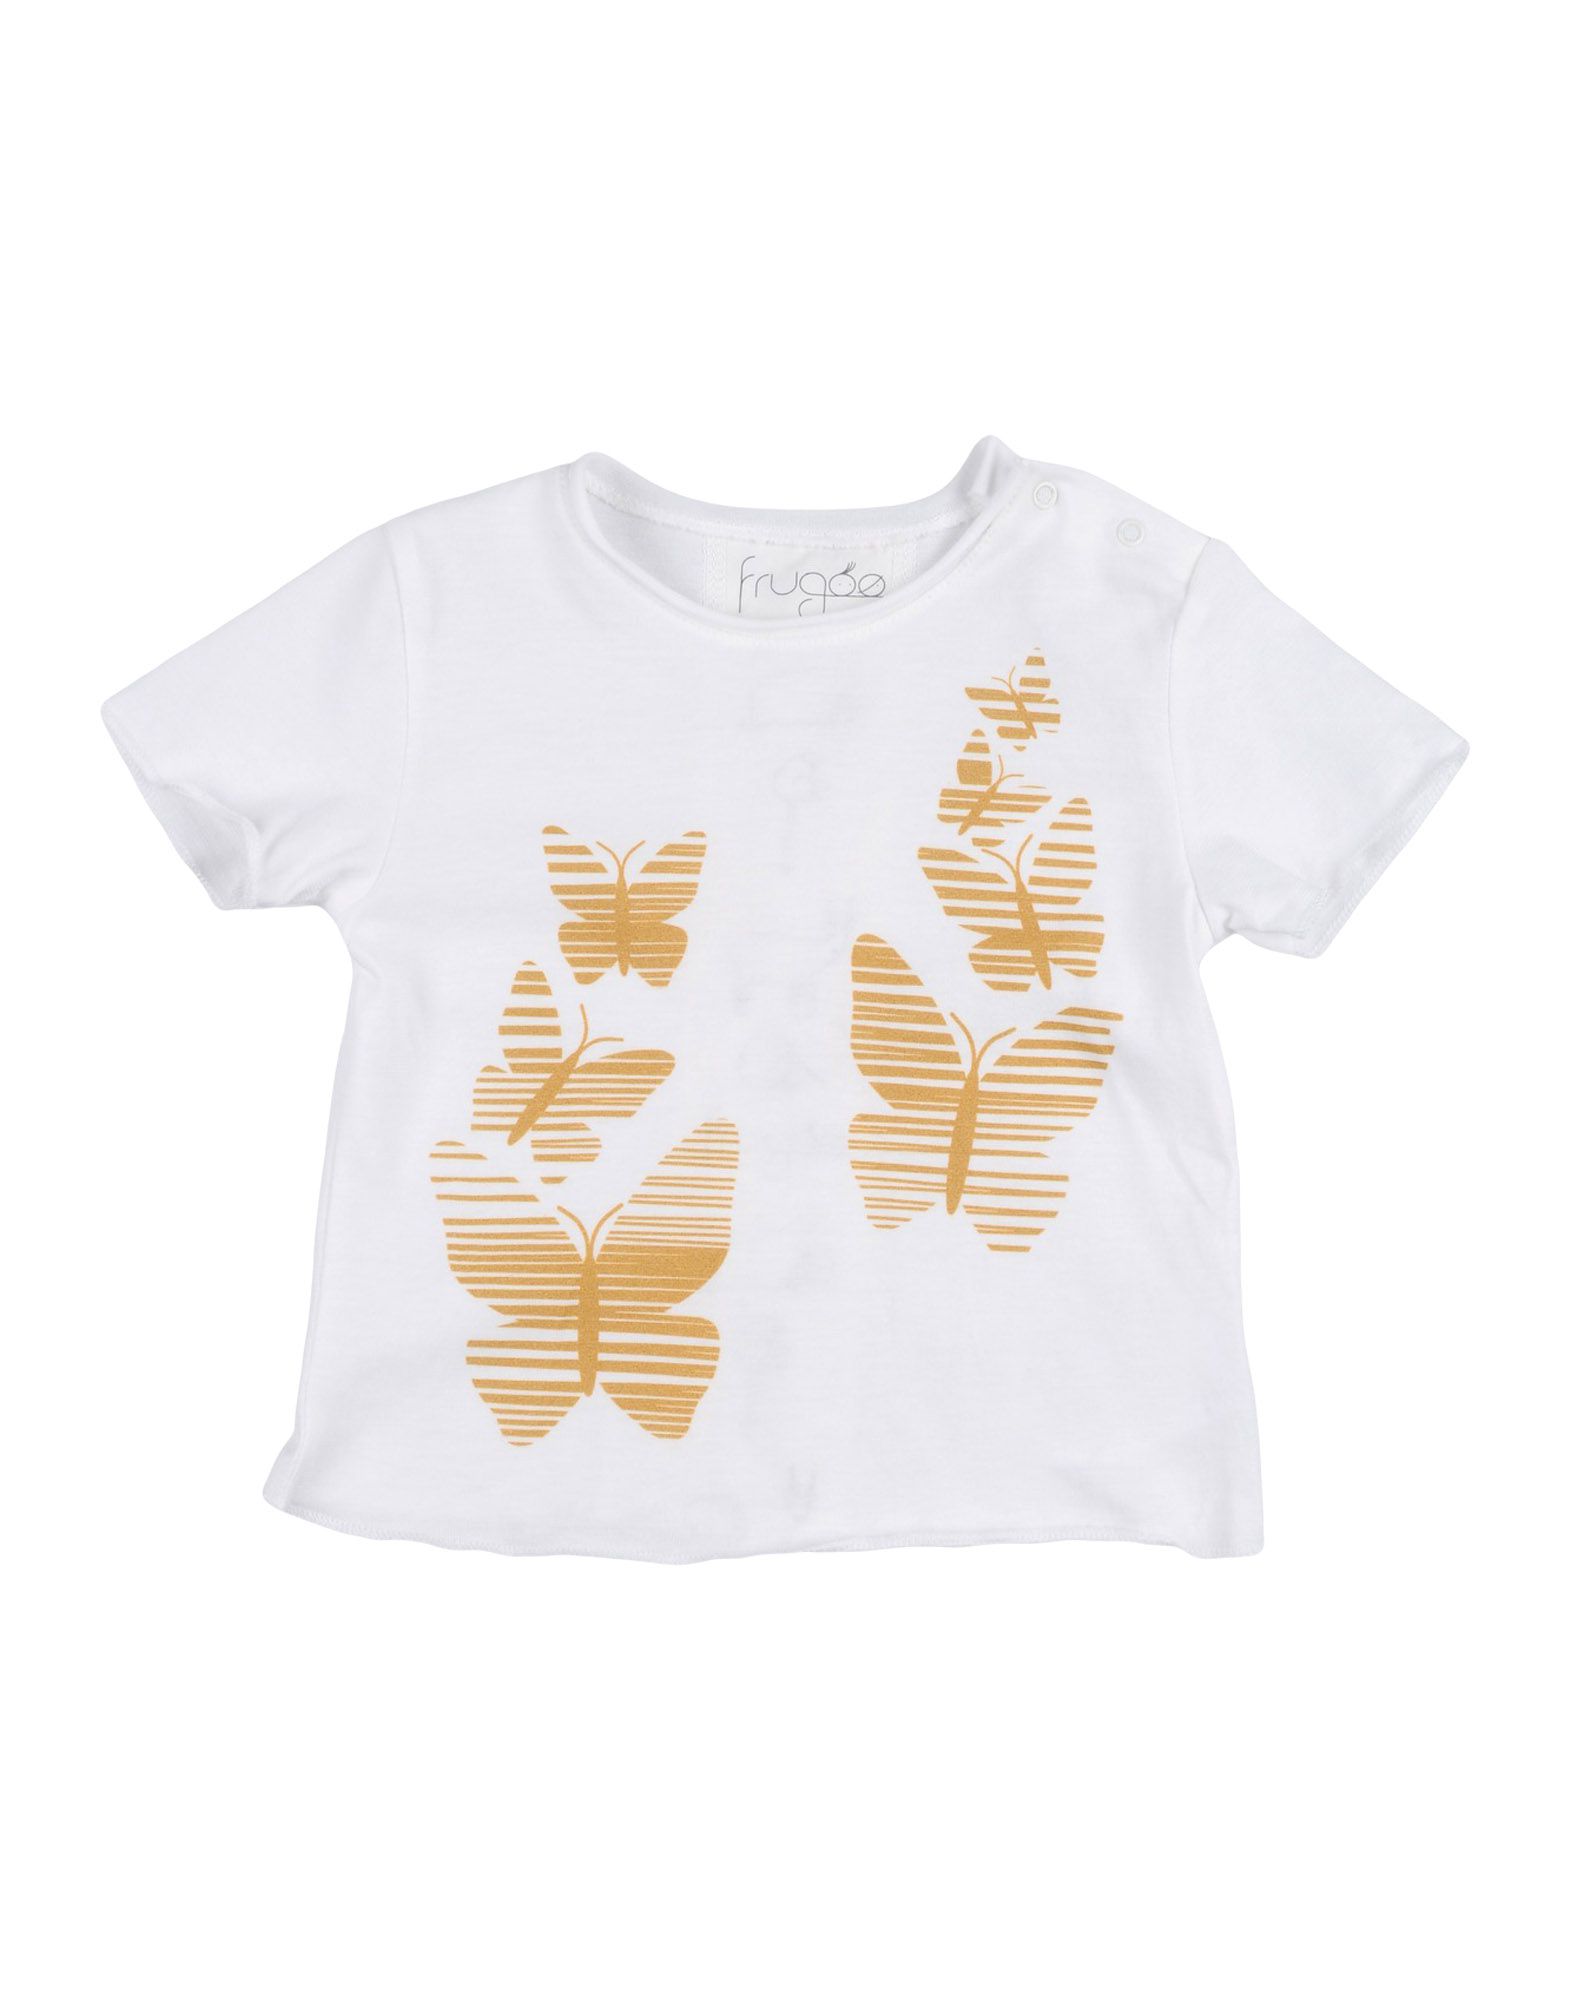 Frugoo Babies' T-shirts In White